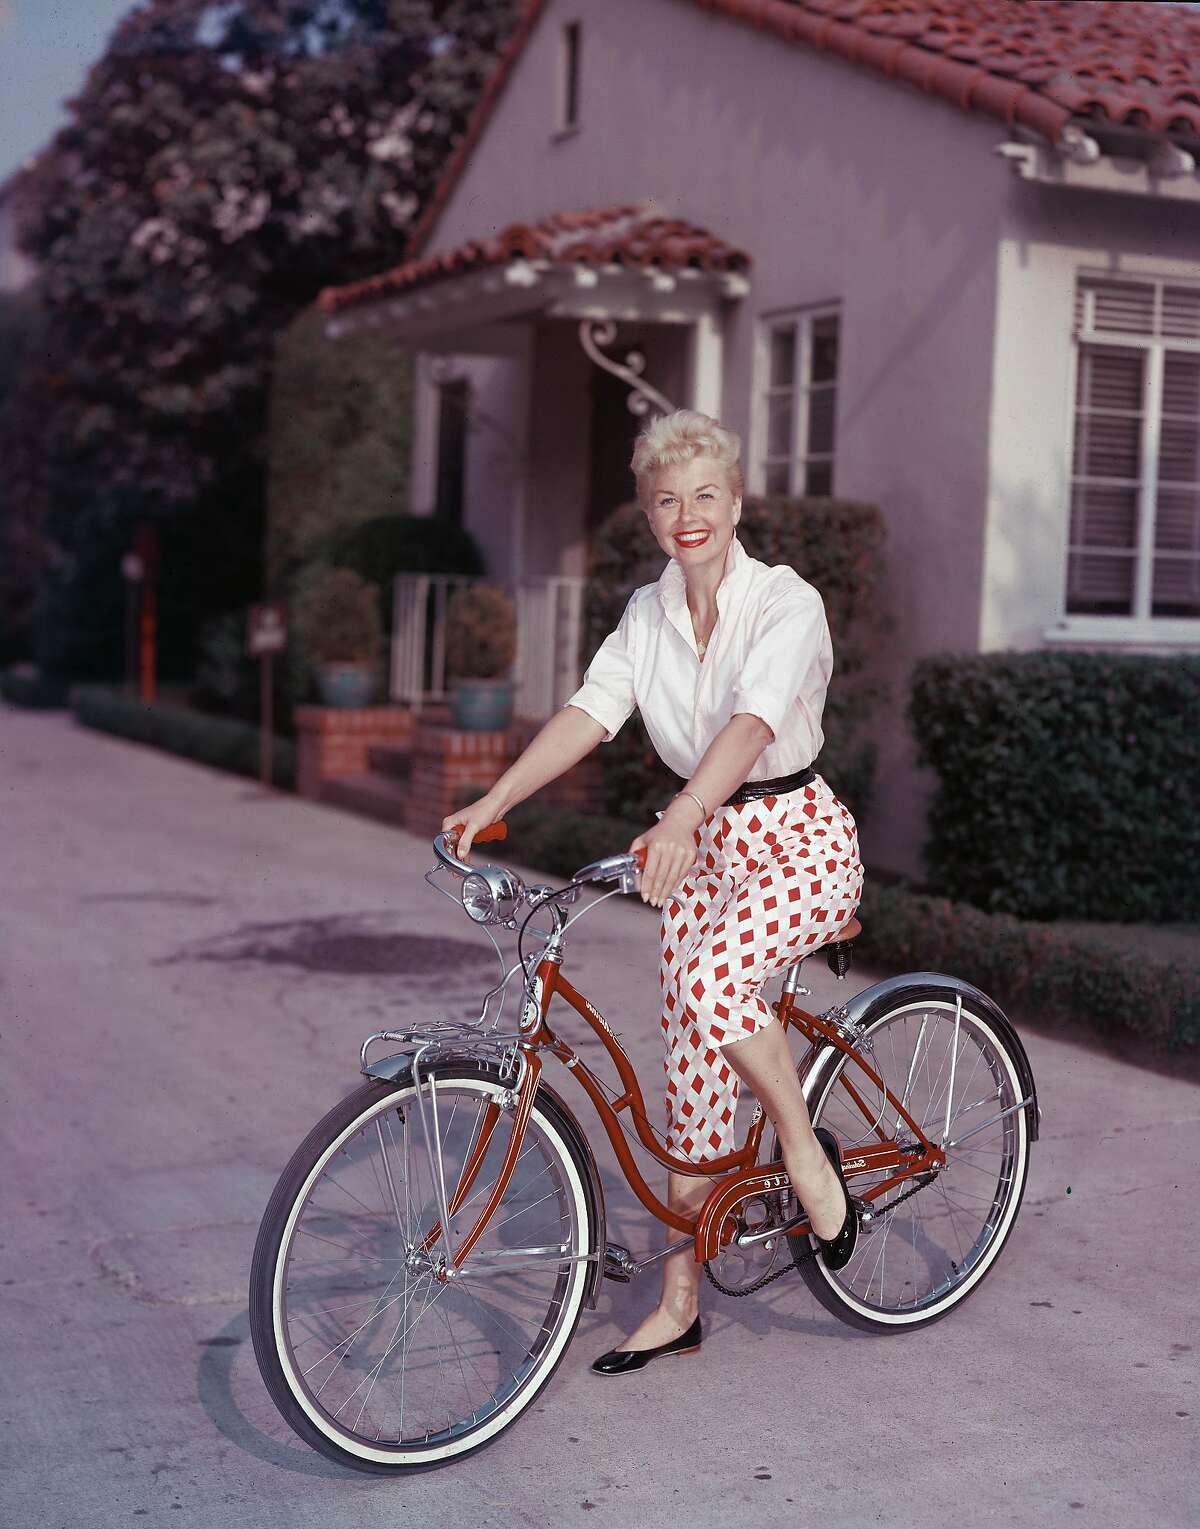 it has been announced that actress Doris Day has died at the age of 97 on May 13, 2019. American actor Doris Day poses on a red Schwinn bicycle, late 1950s. (Photo by Hulton Archive/Getty Images)